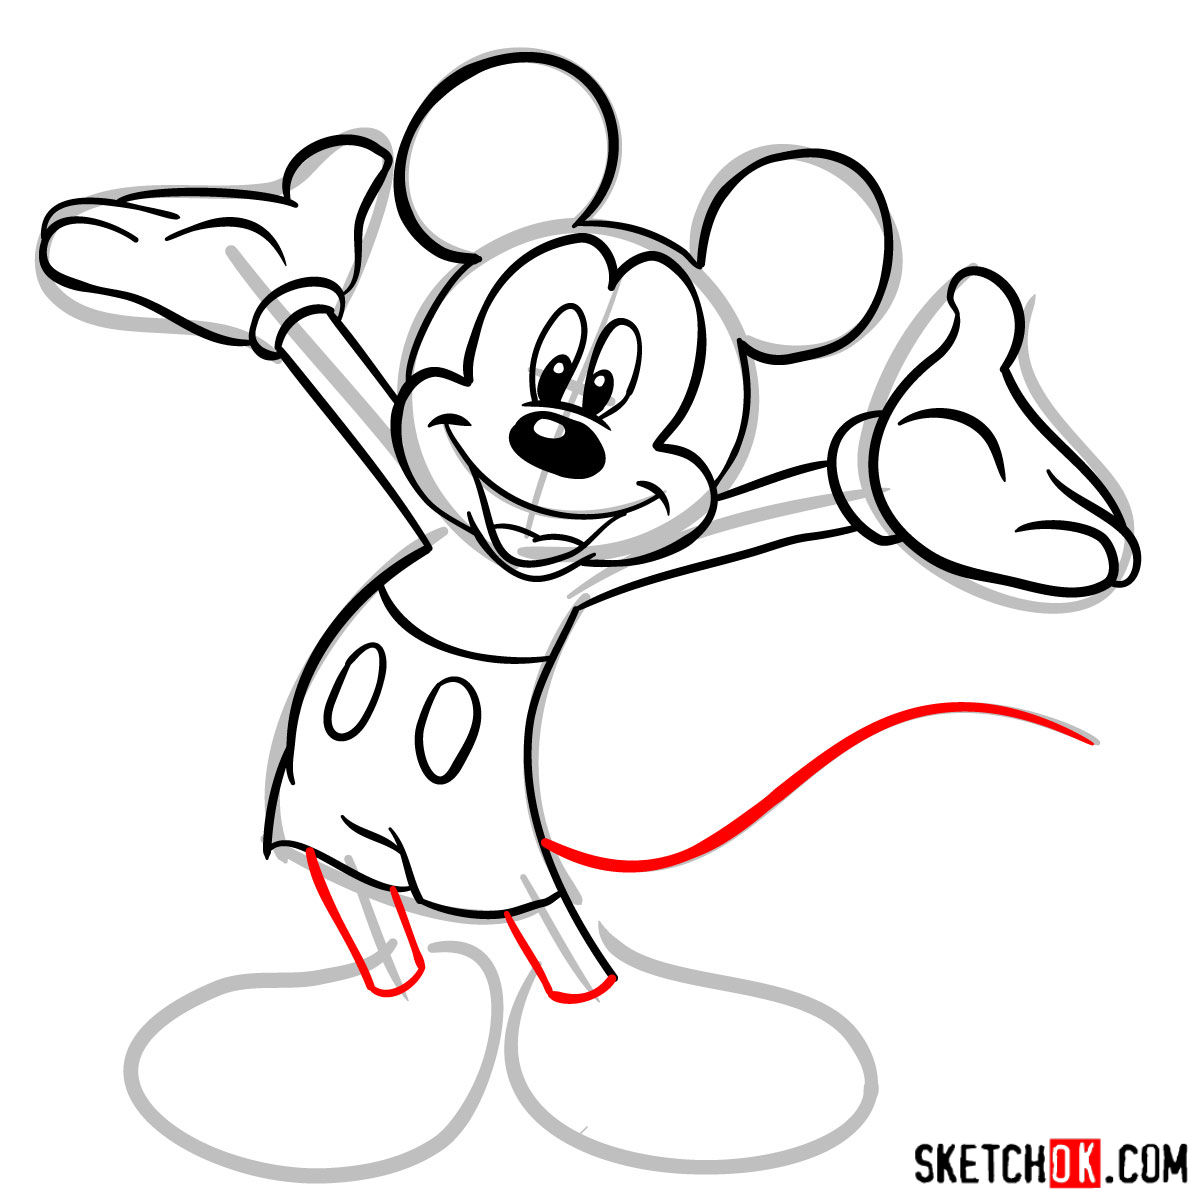 How to Draw an Easy Mickey Mouse Face - Really Easy Drawing Tutorial-vachngandaiphat.com.vn